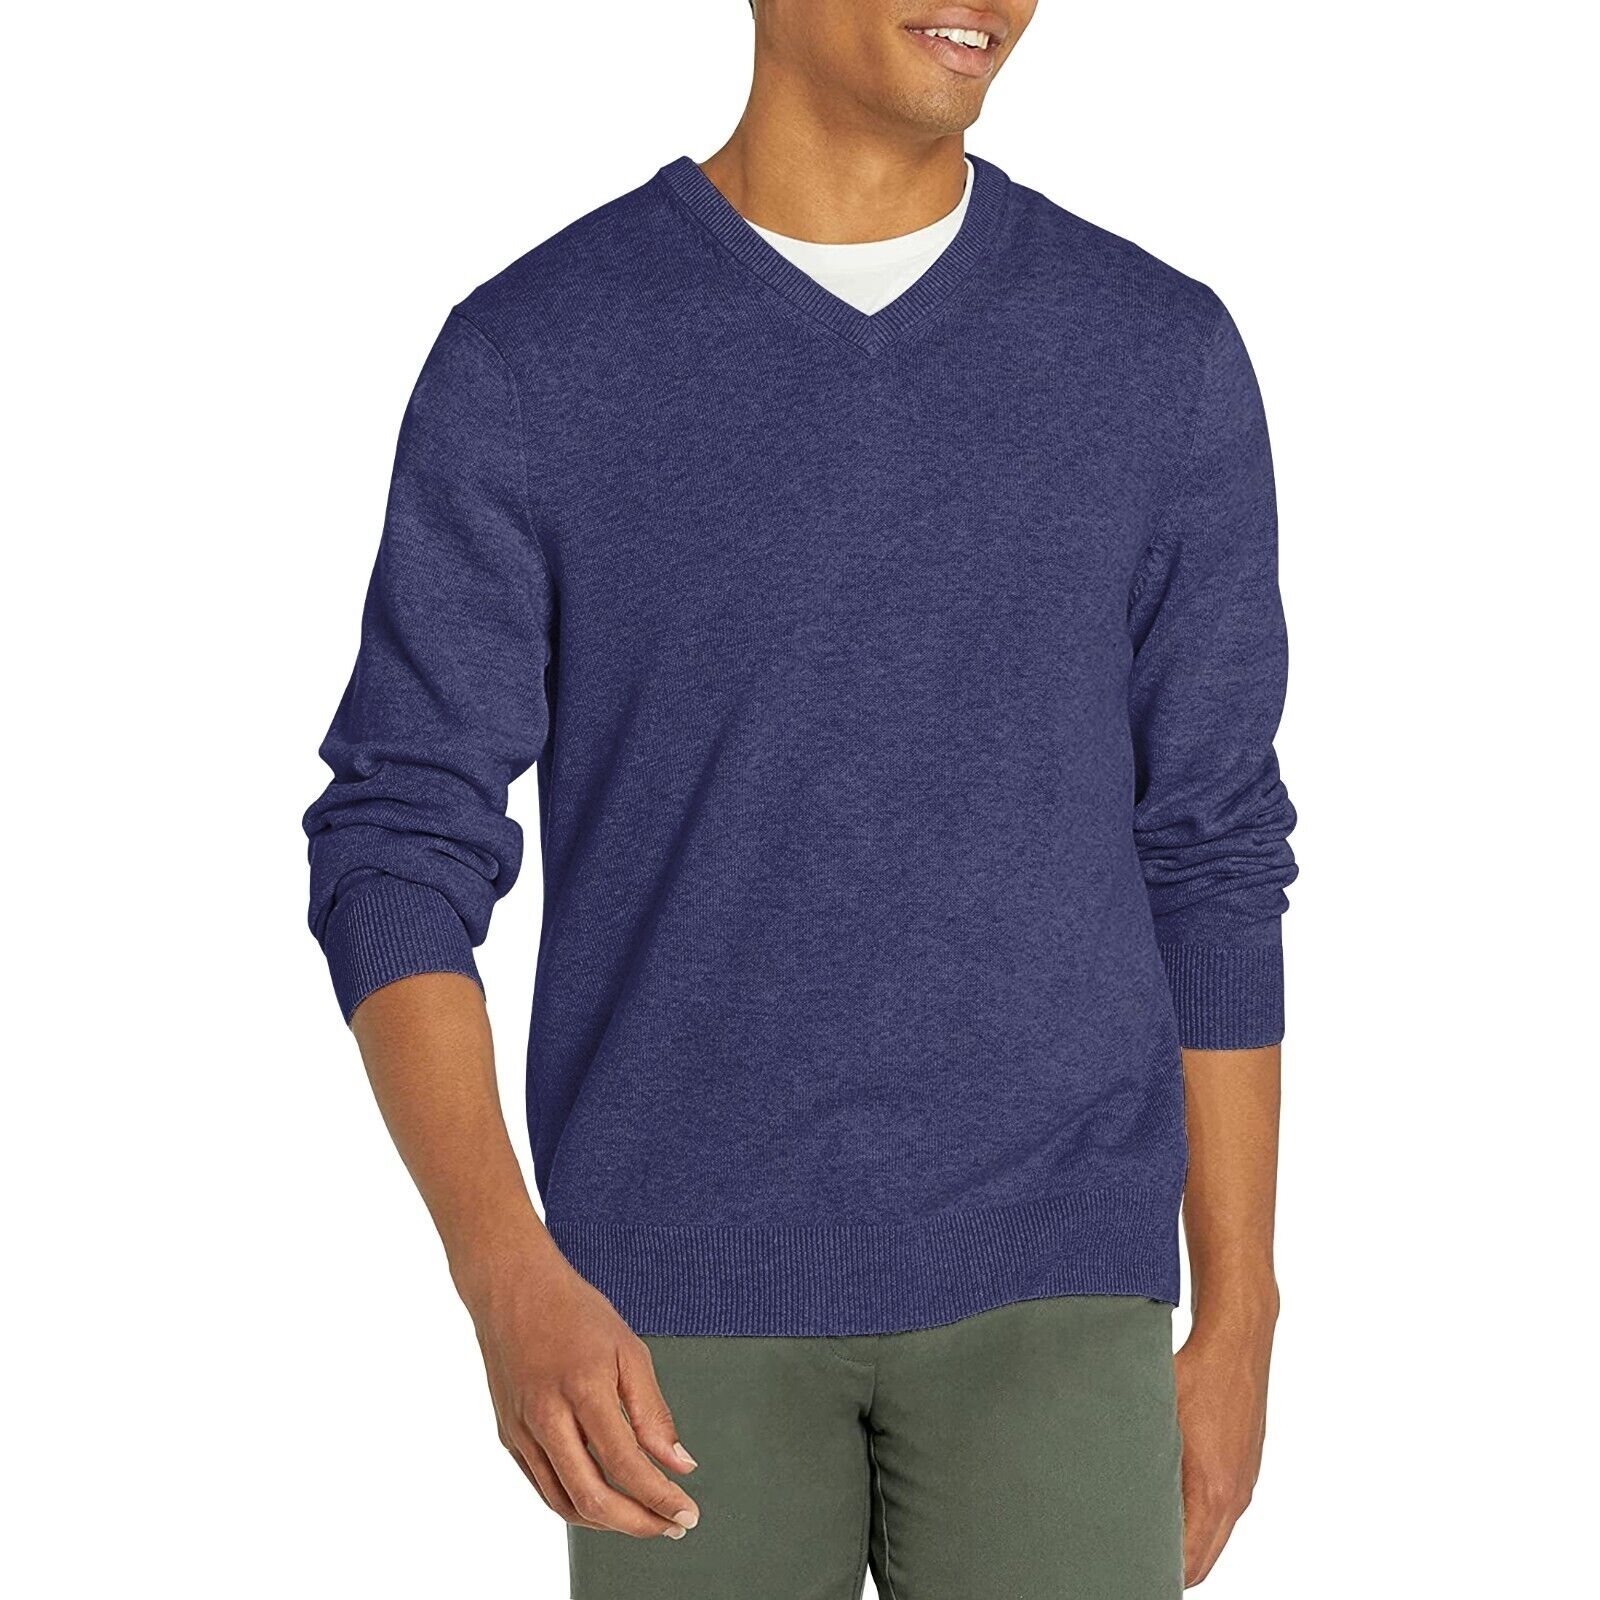 Men's Casual Ultra-Soft Slim Fit Warm Knit Pullover V-Neck Sweater For Winter - Blue, X-Large